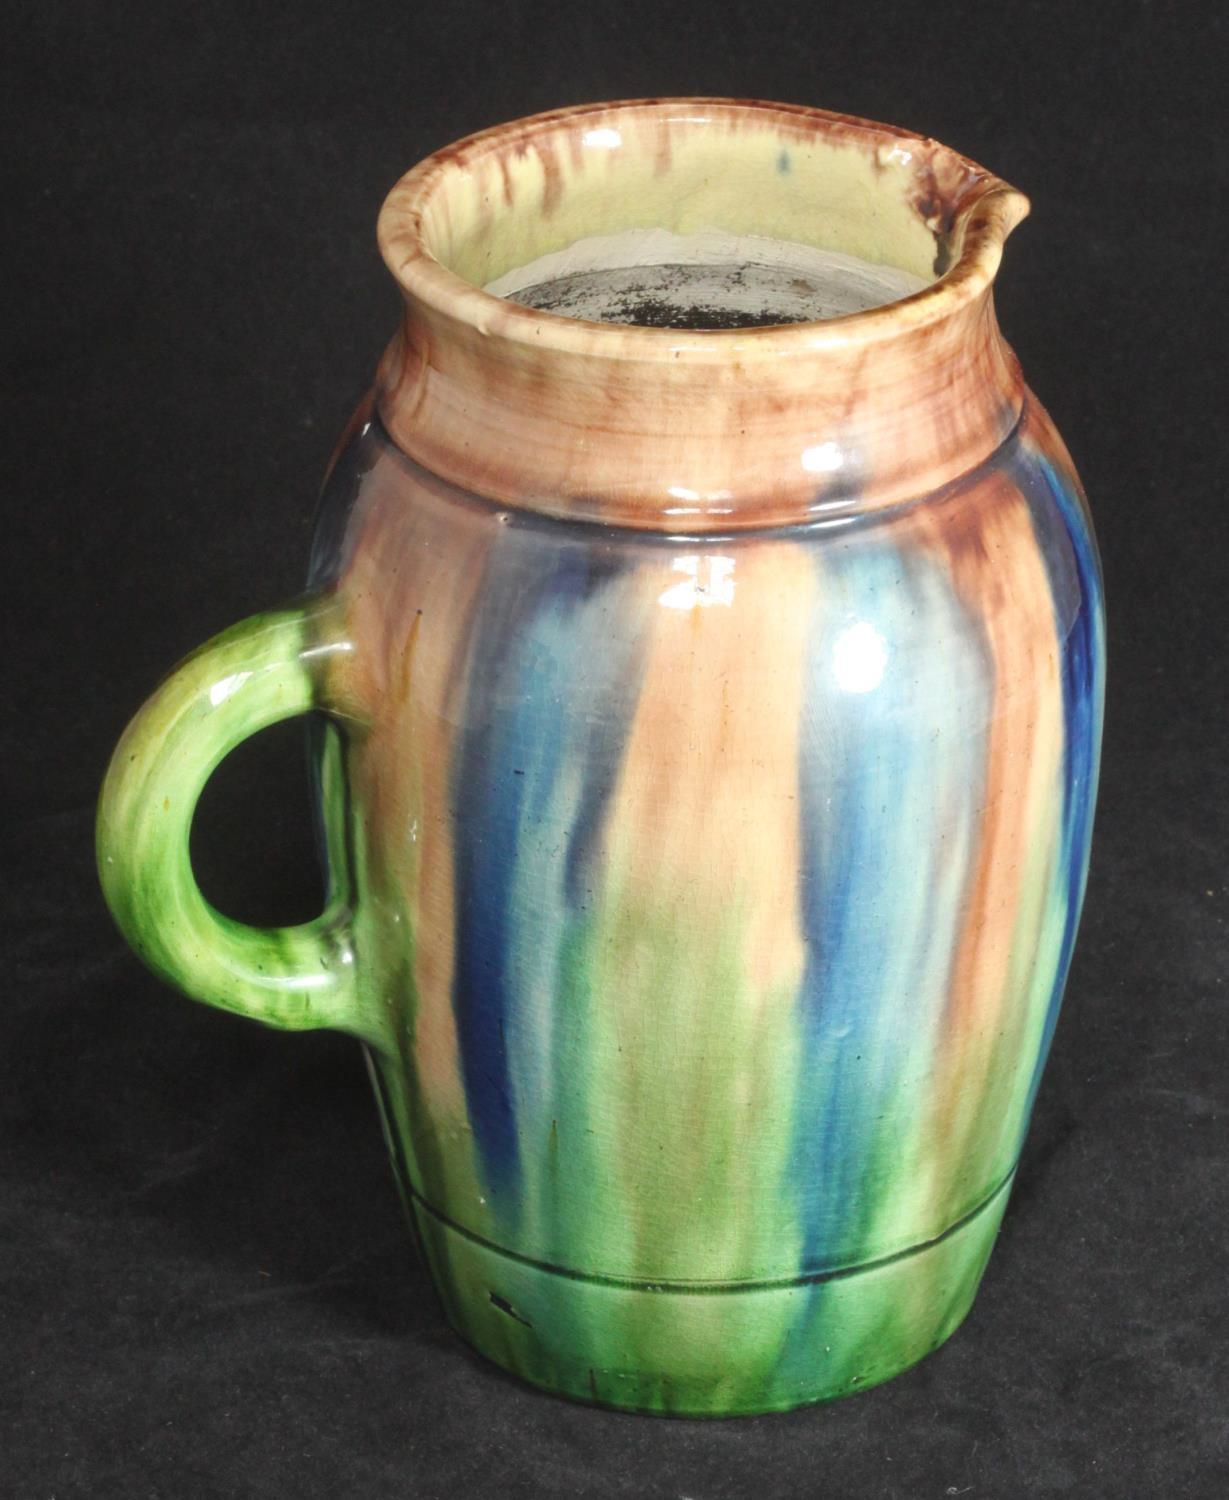 A 20th century 'Whieldon' style pottery jug, finished in a blue, brown and green glaze, impressed